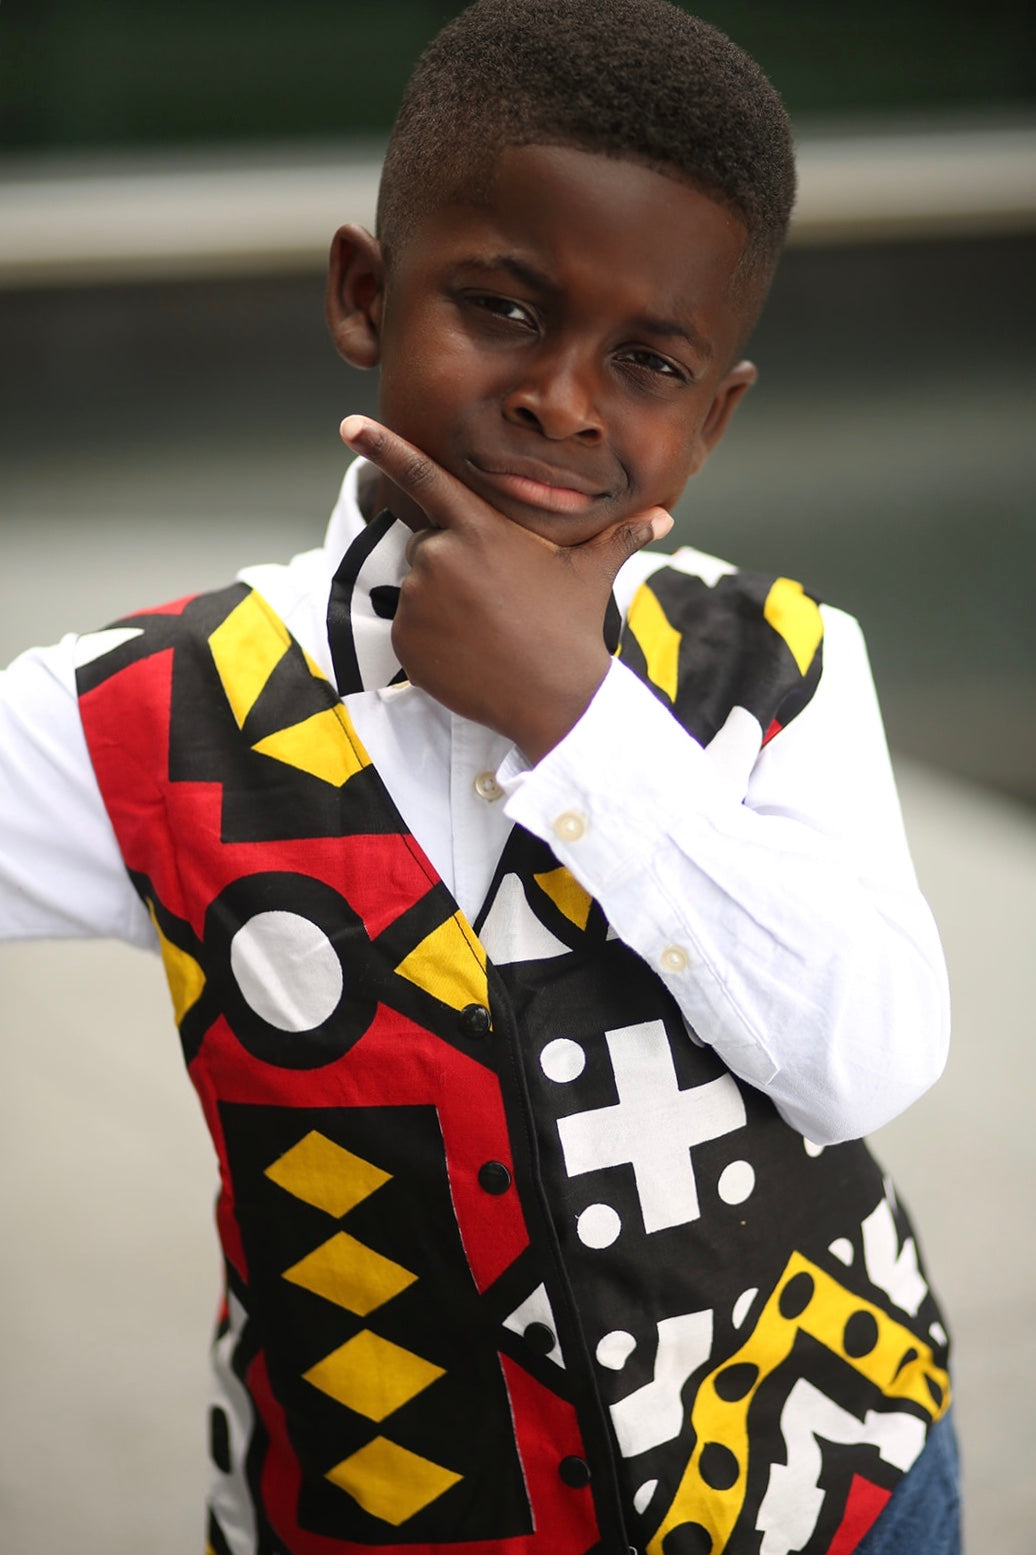 Boys Red Angolan Vest with Bow Tie